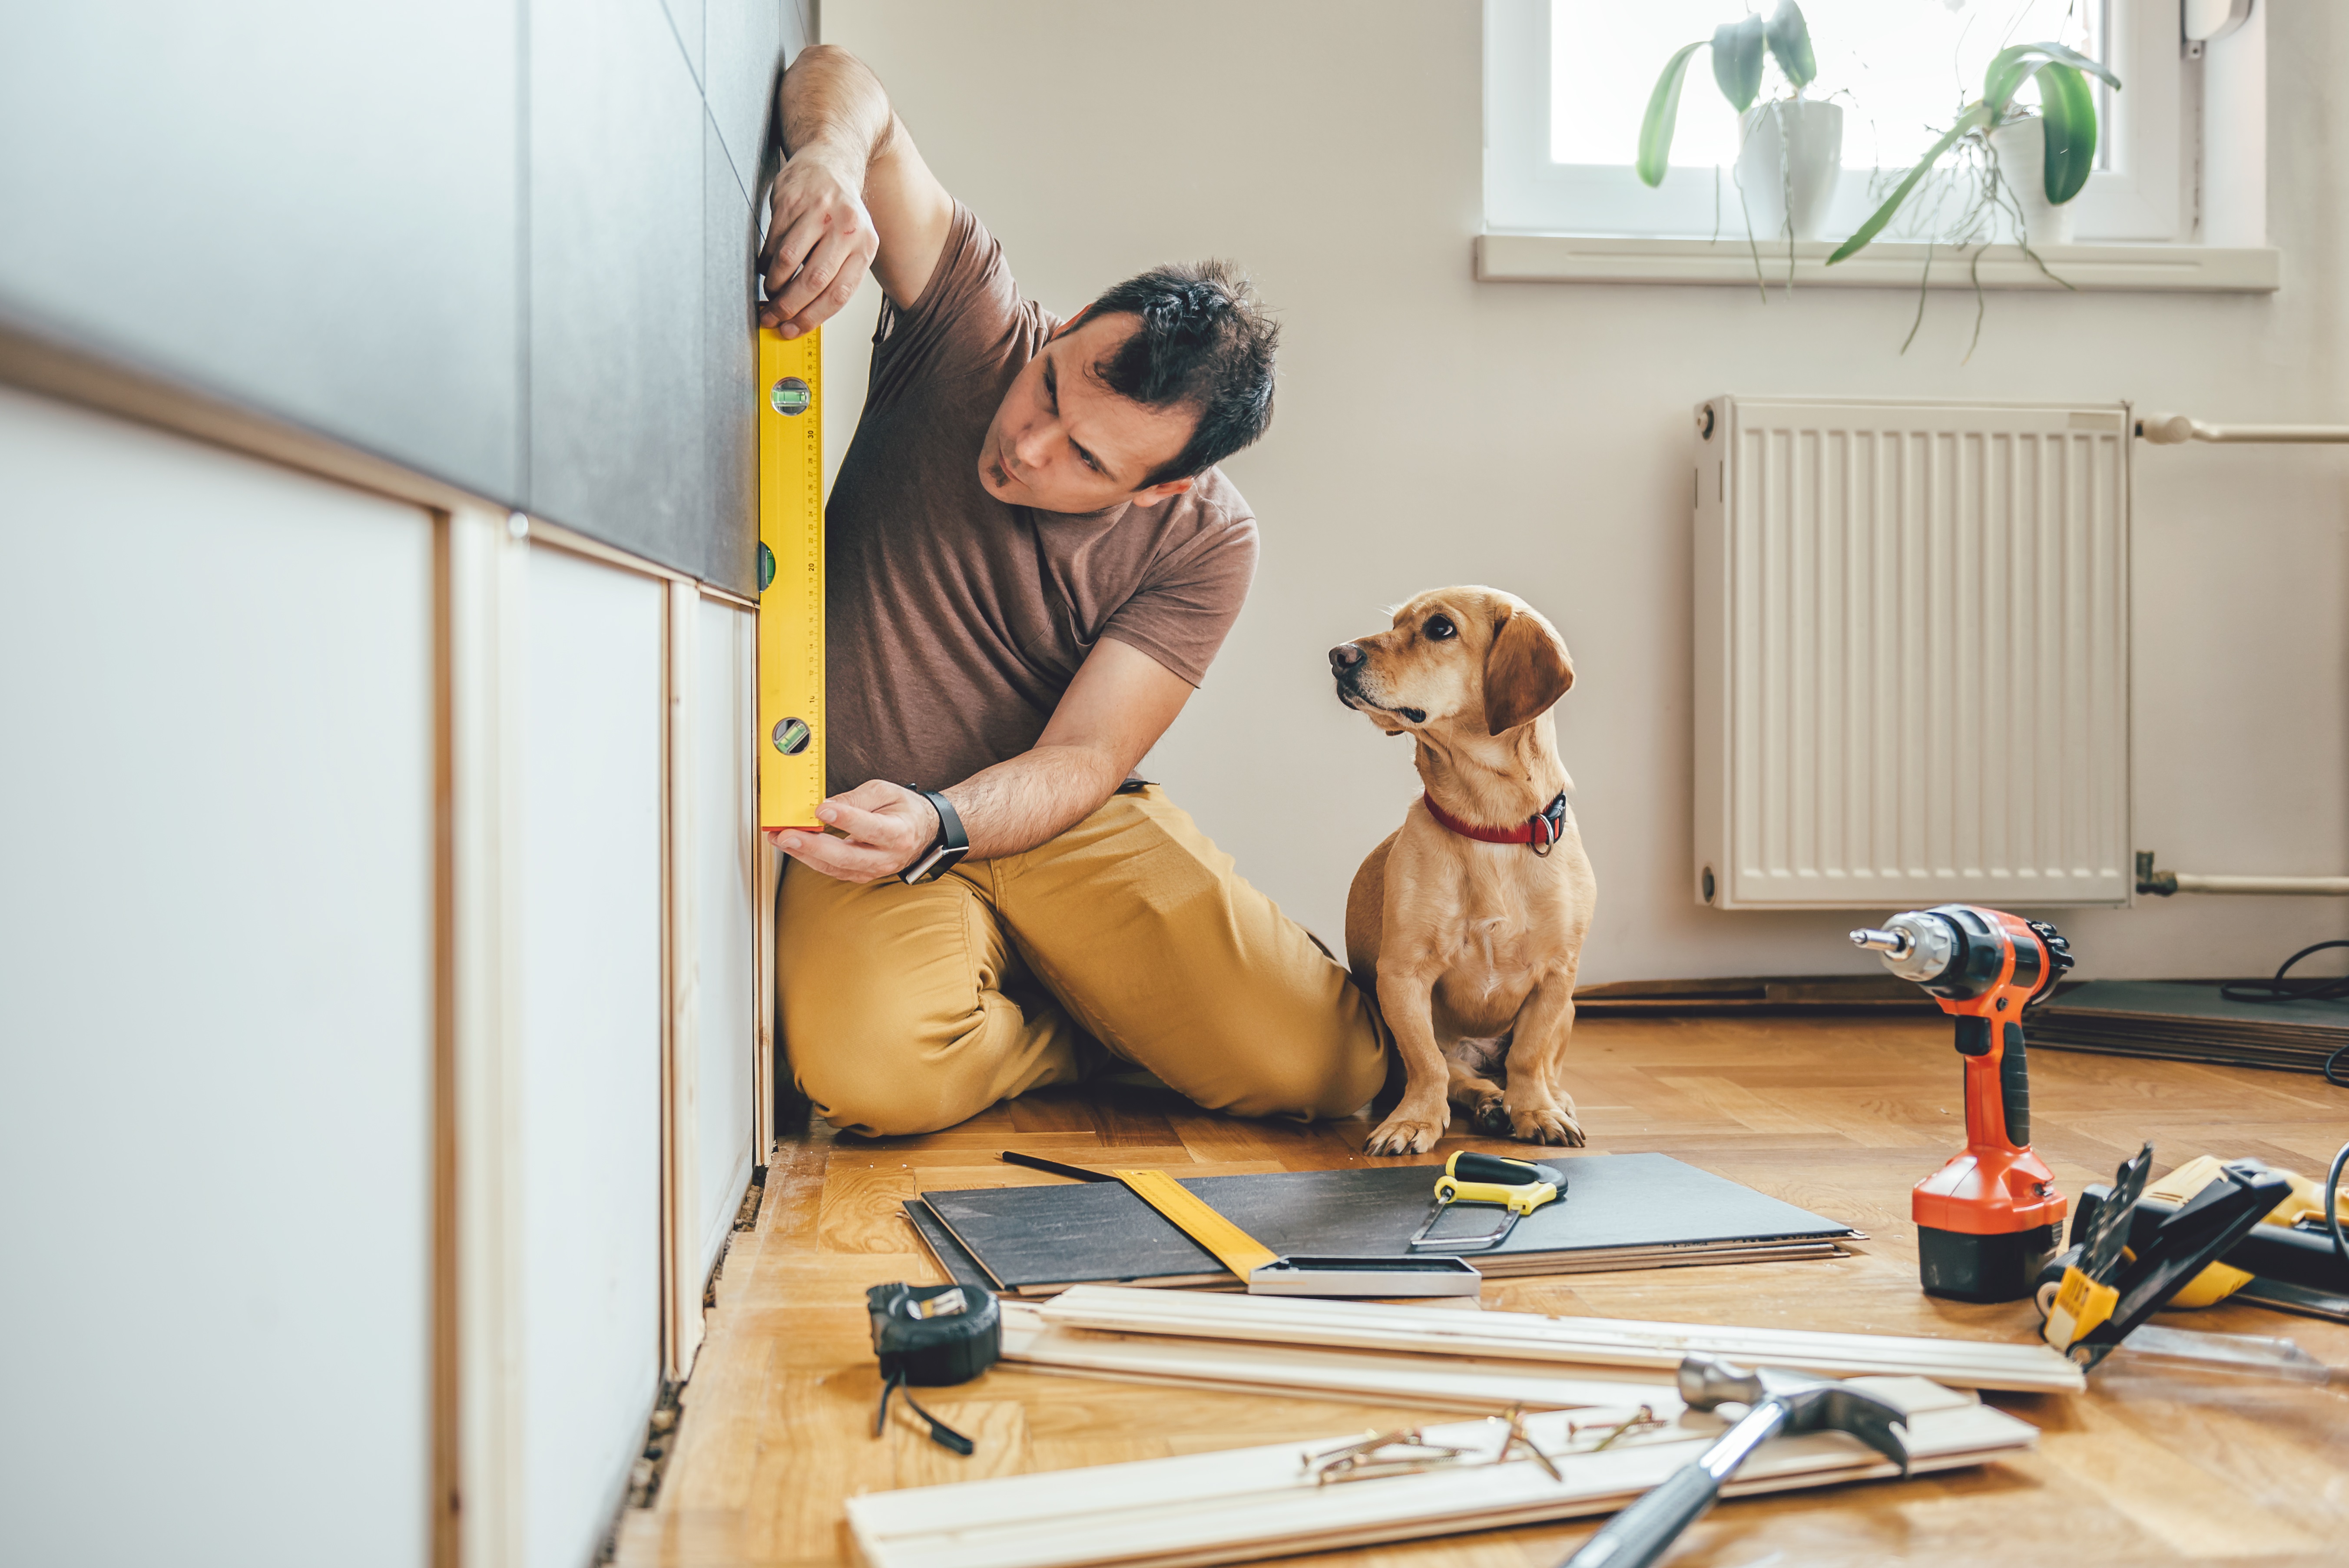 Here are a few tips for making home repairs: